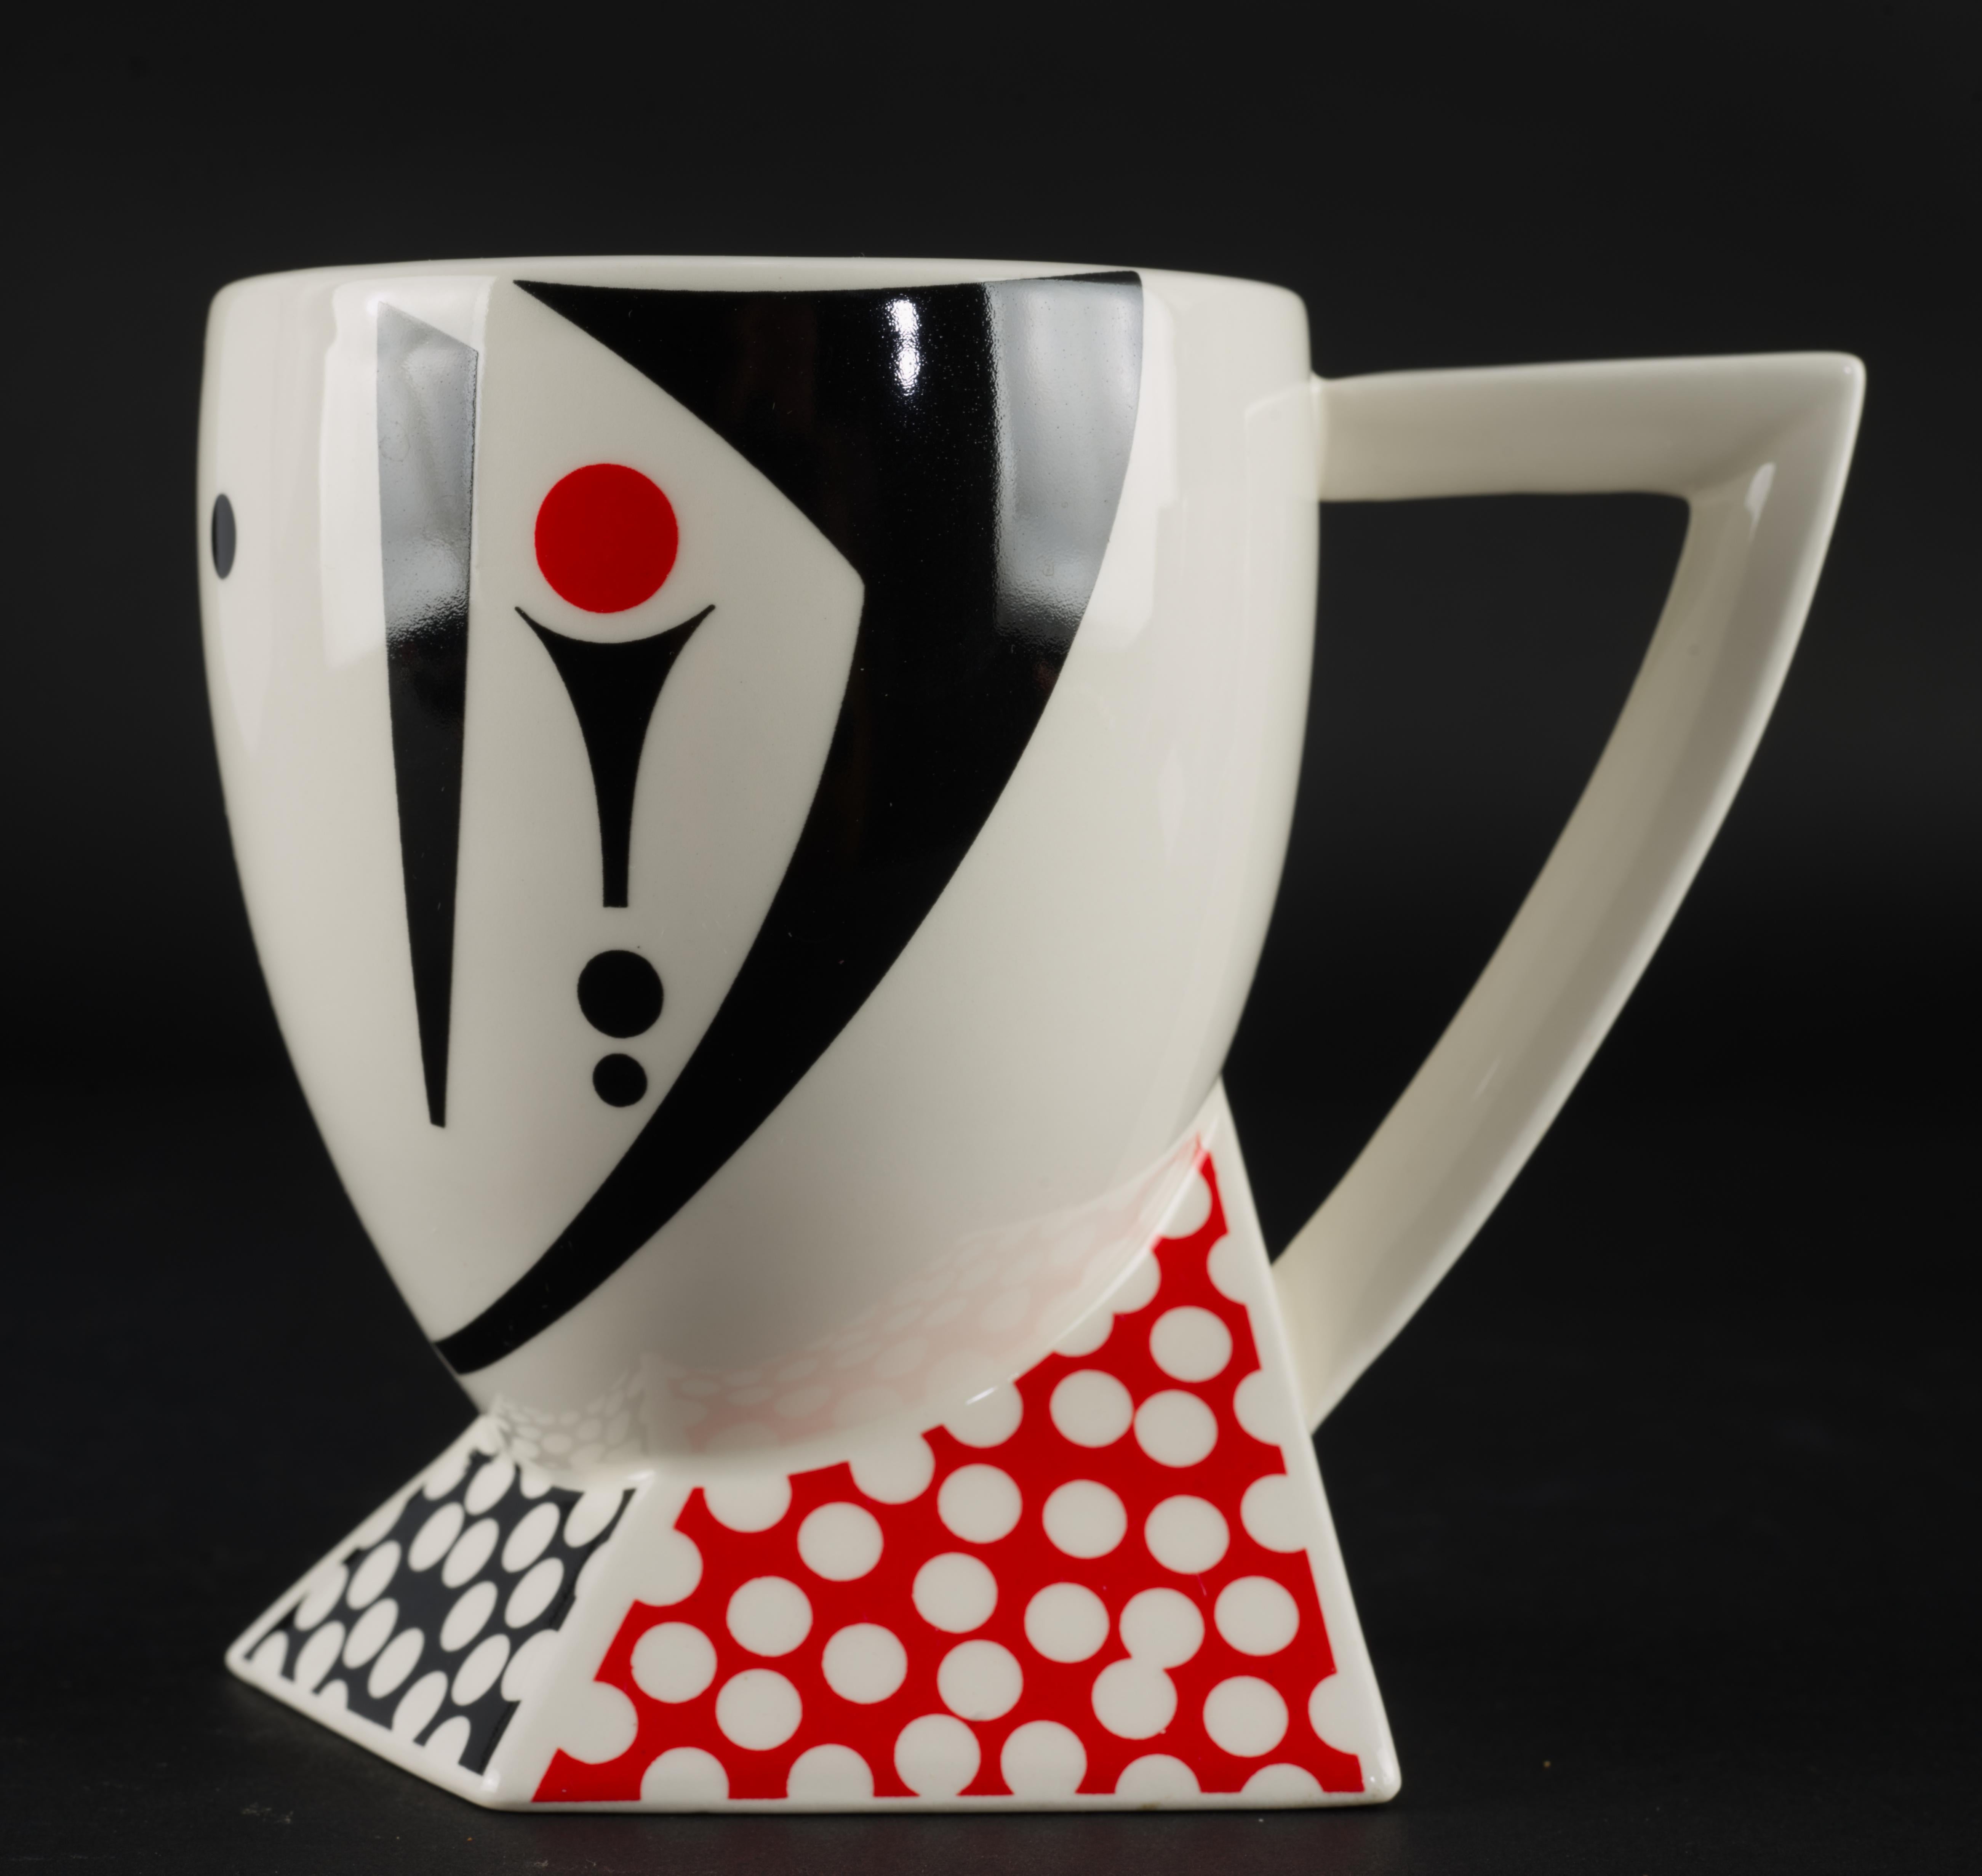 Set of 4 mugs in Alpha 3 pattern was designed by Kaneaki Fujimori for Kato Kogei Japan in 1980s. Alpha 3 series consists of mugs, salad/casual plates, and decorative serving platter. All 4 mugs in the set are decorated with different, highly